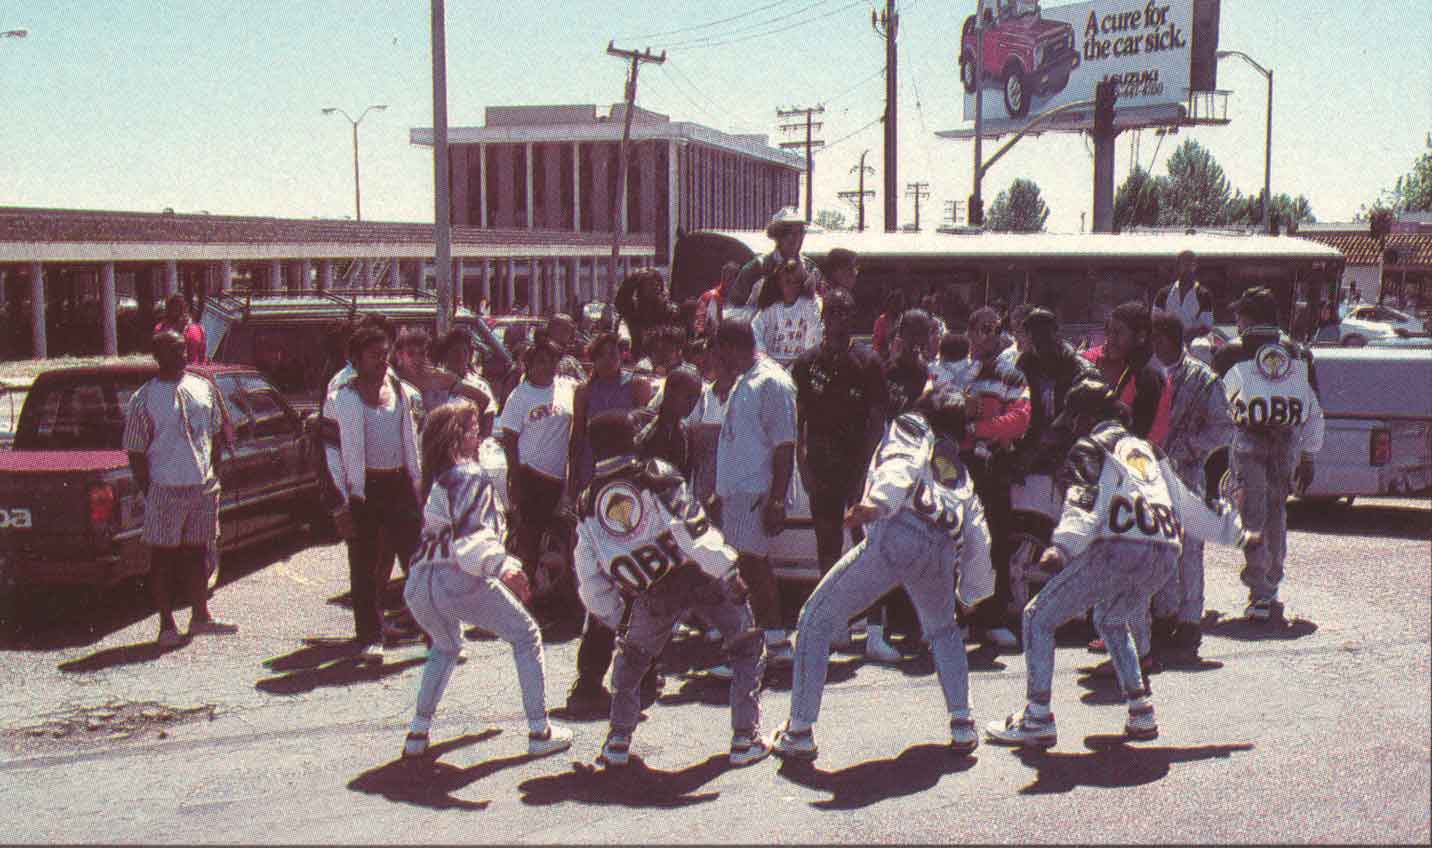 A group of Black teenagers in large jackets and faded jeans dance in a parking lot.